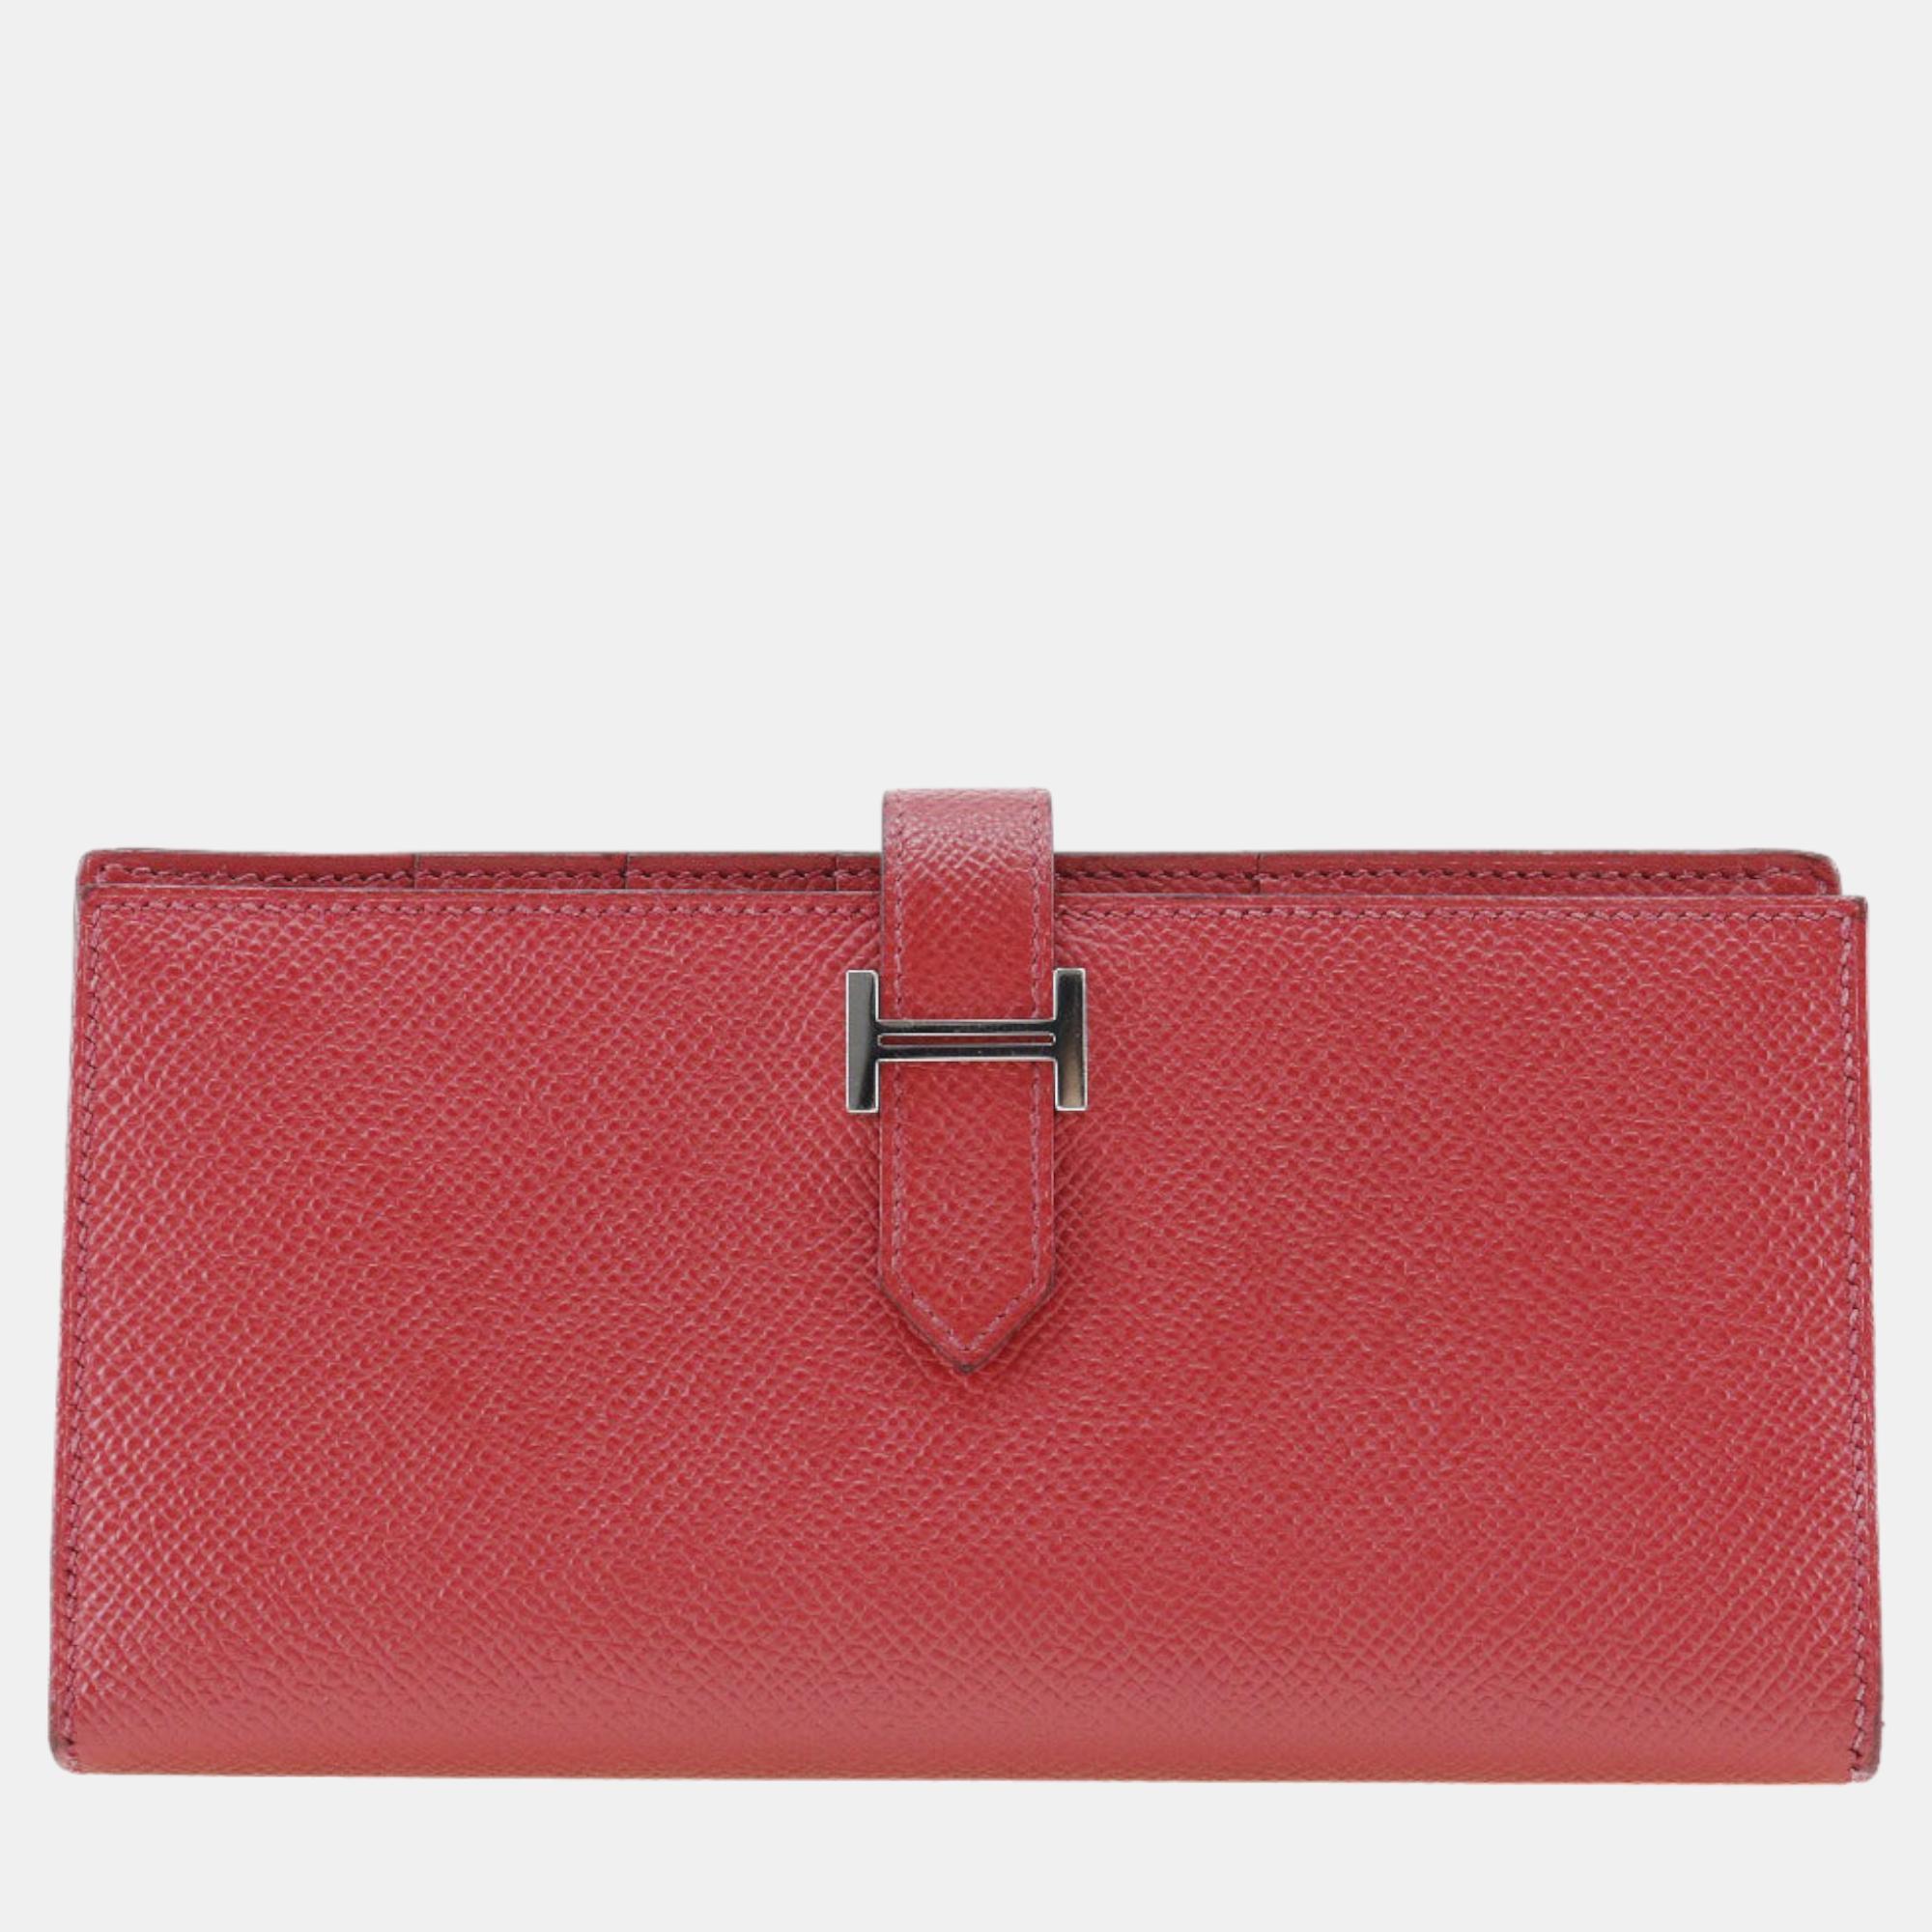 Pre-owned Hermes Red Leather Bearn Wallet